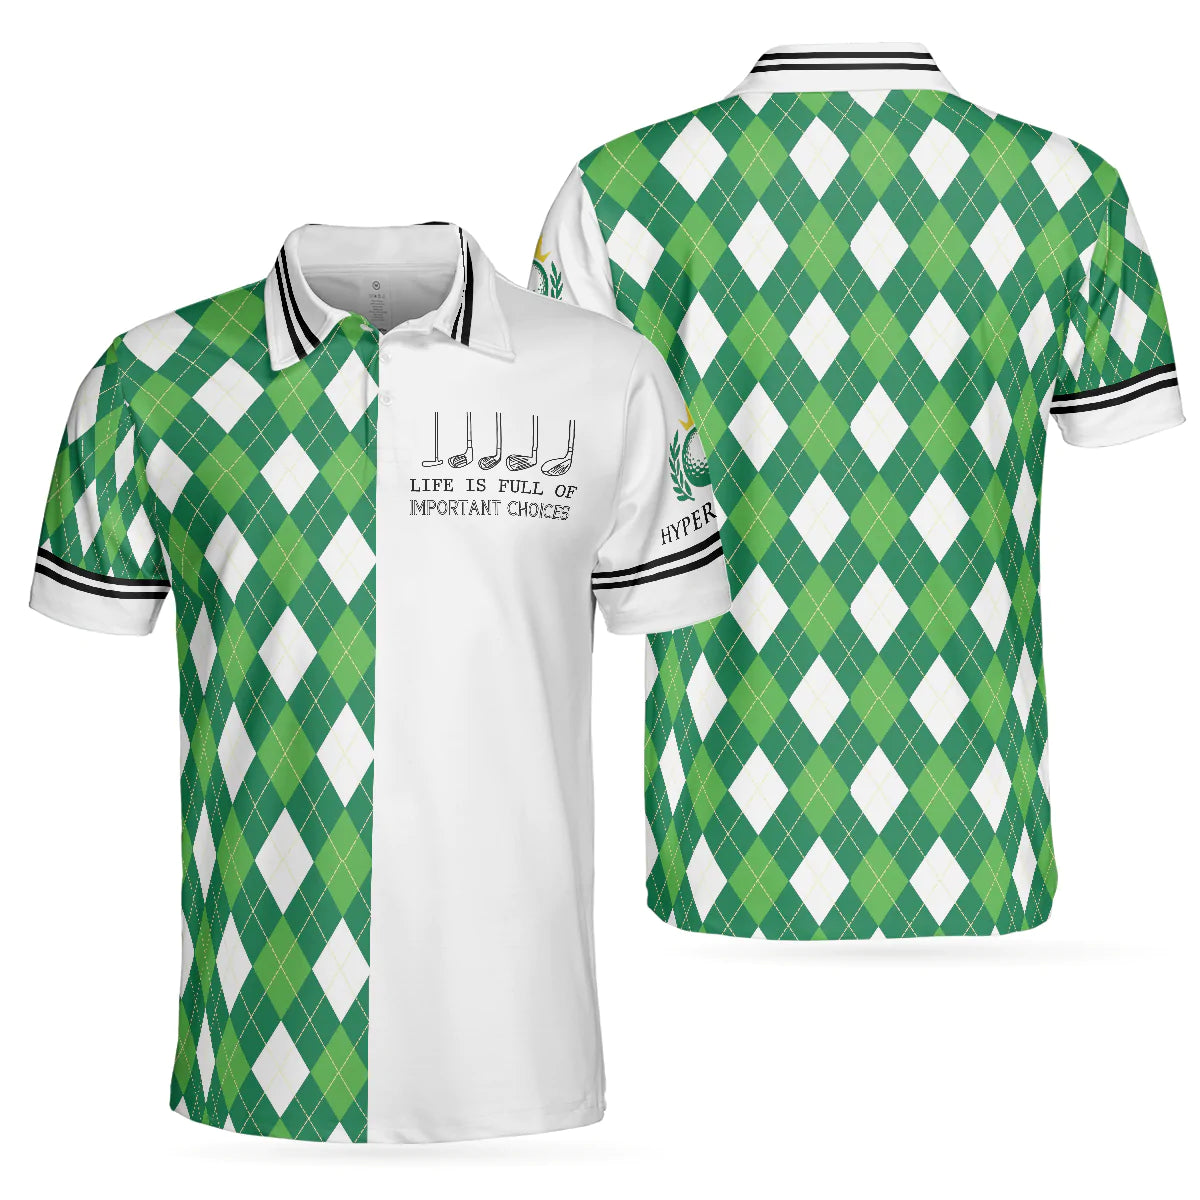 mens polo shirt with green argyle pattern and life is full of important choices design gp362 p8o5q